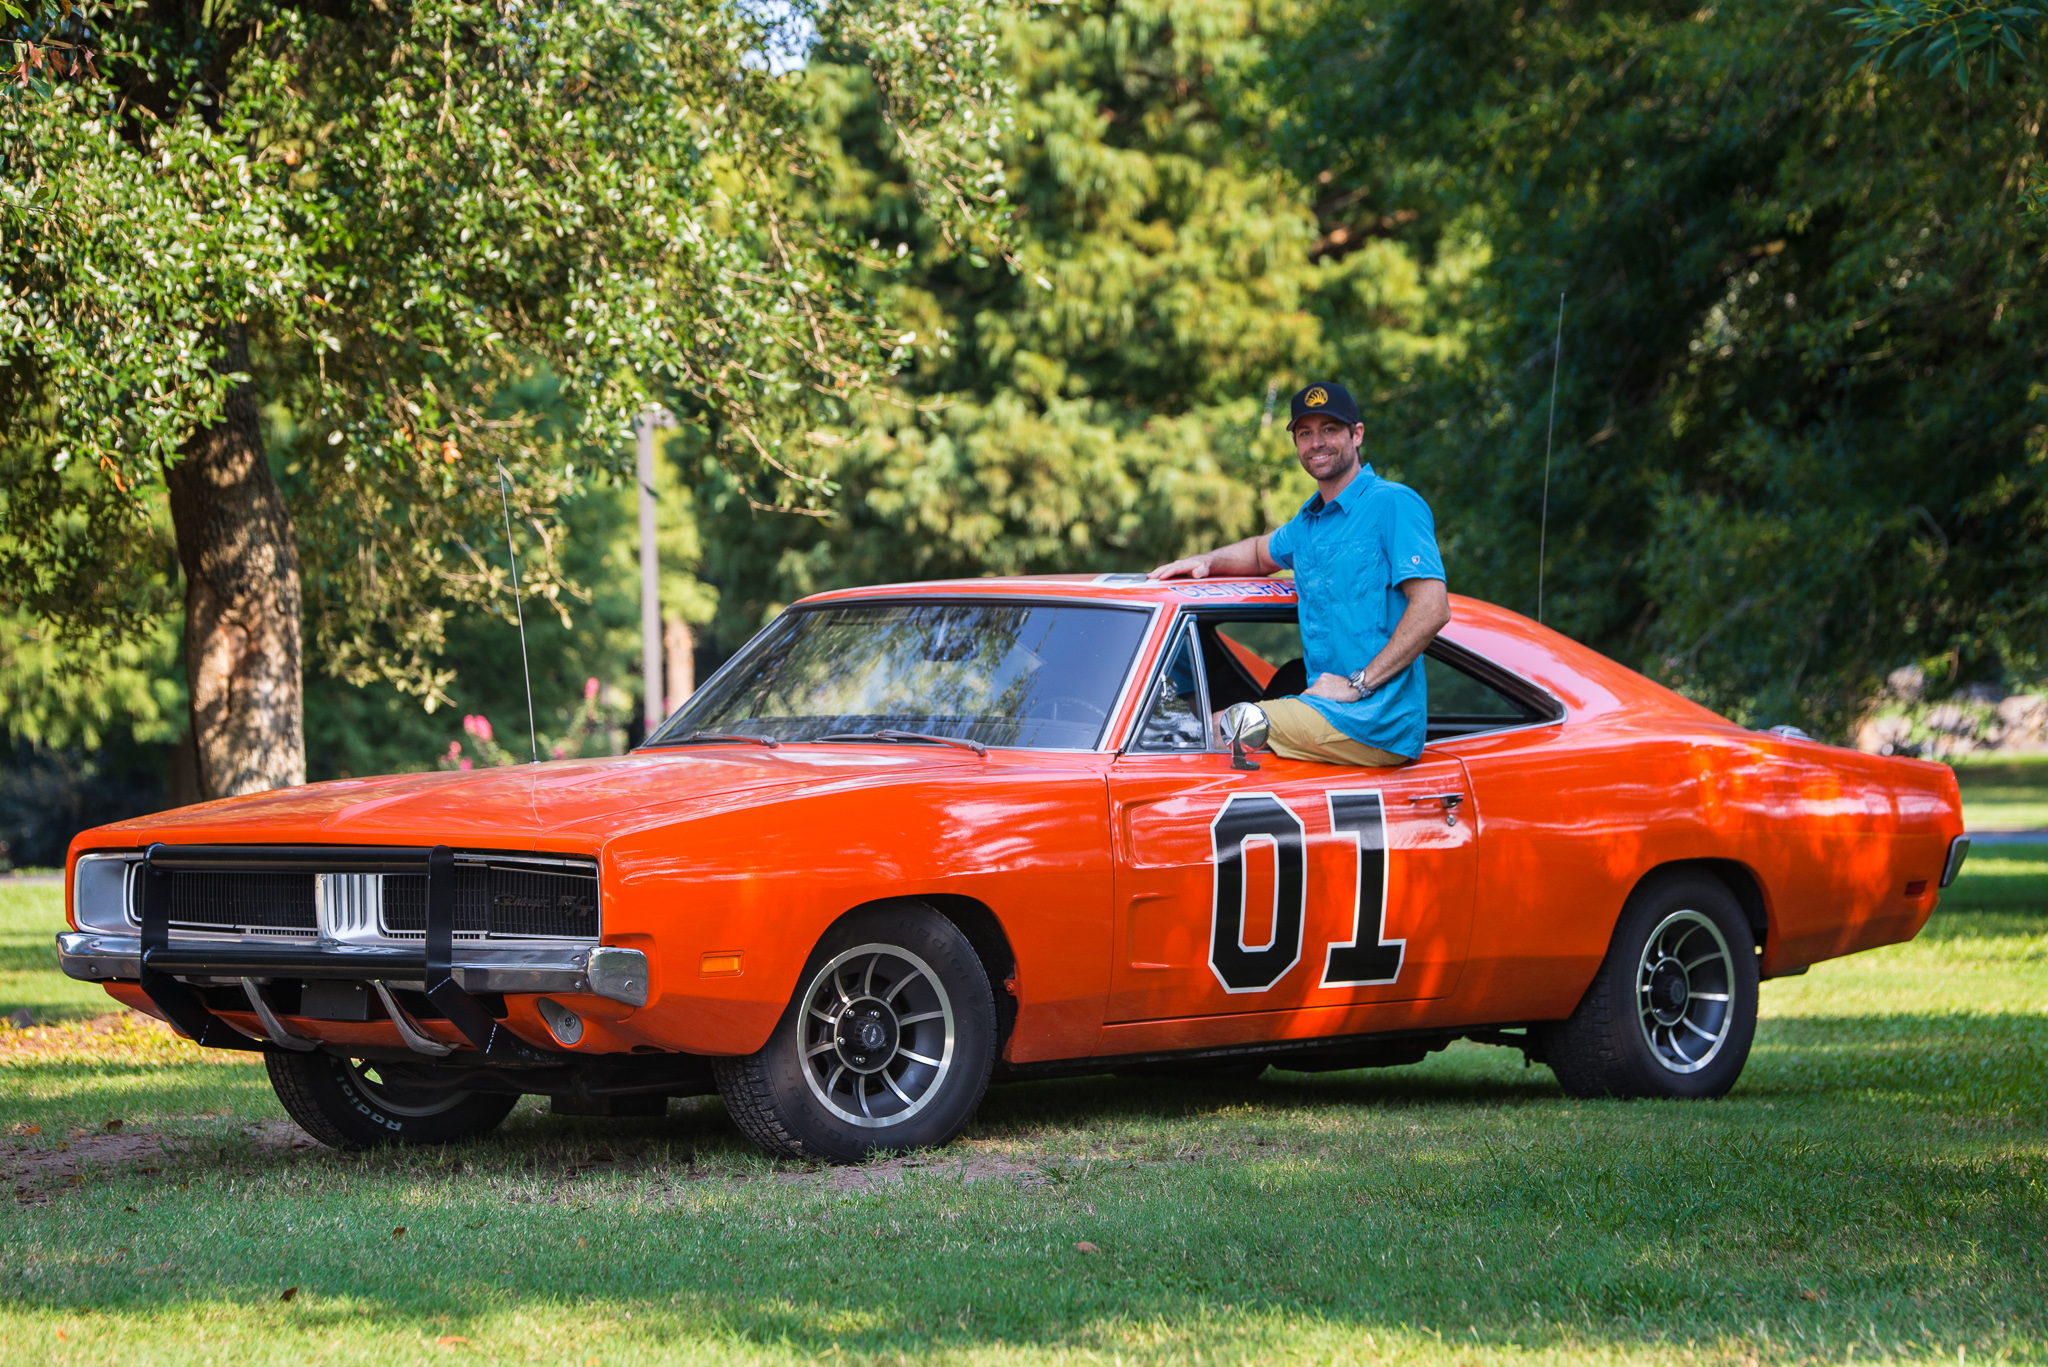 Kevin Waterman pictured with his personal General Lee